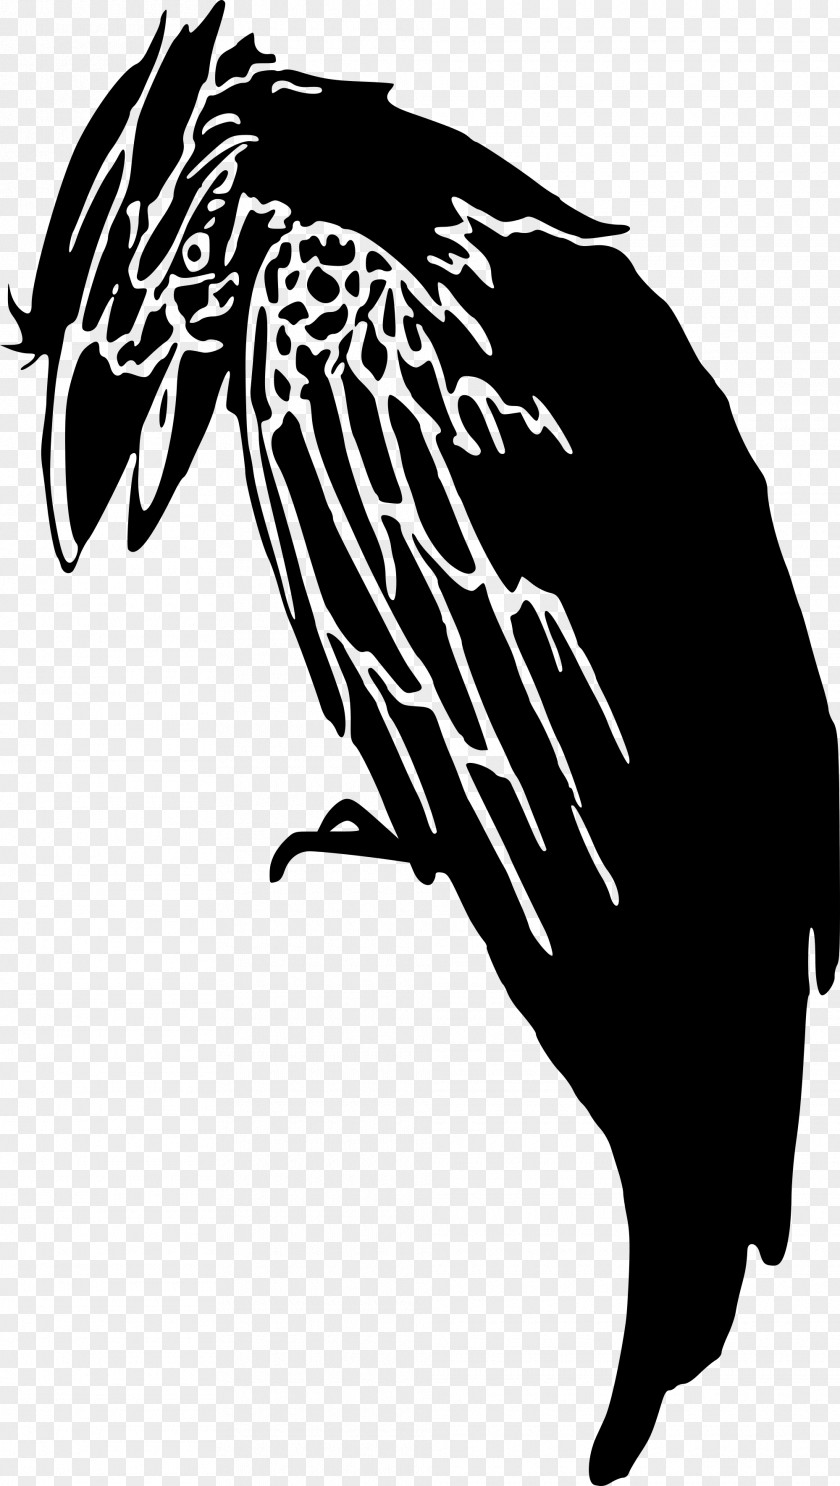 Crow Silhouette Clip Art PNG